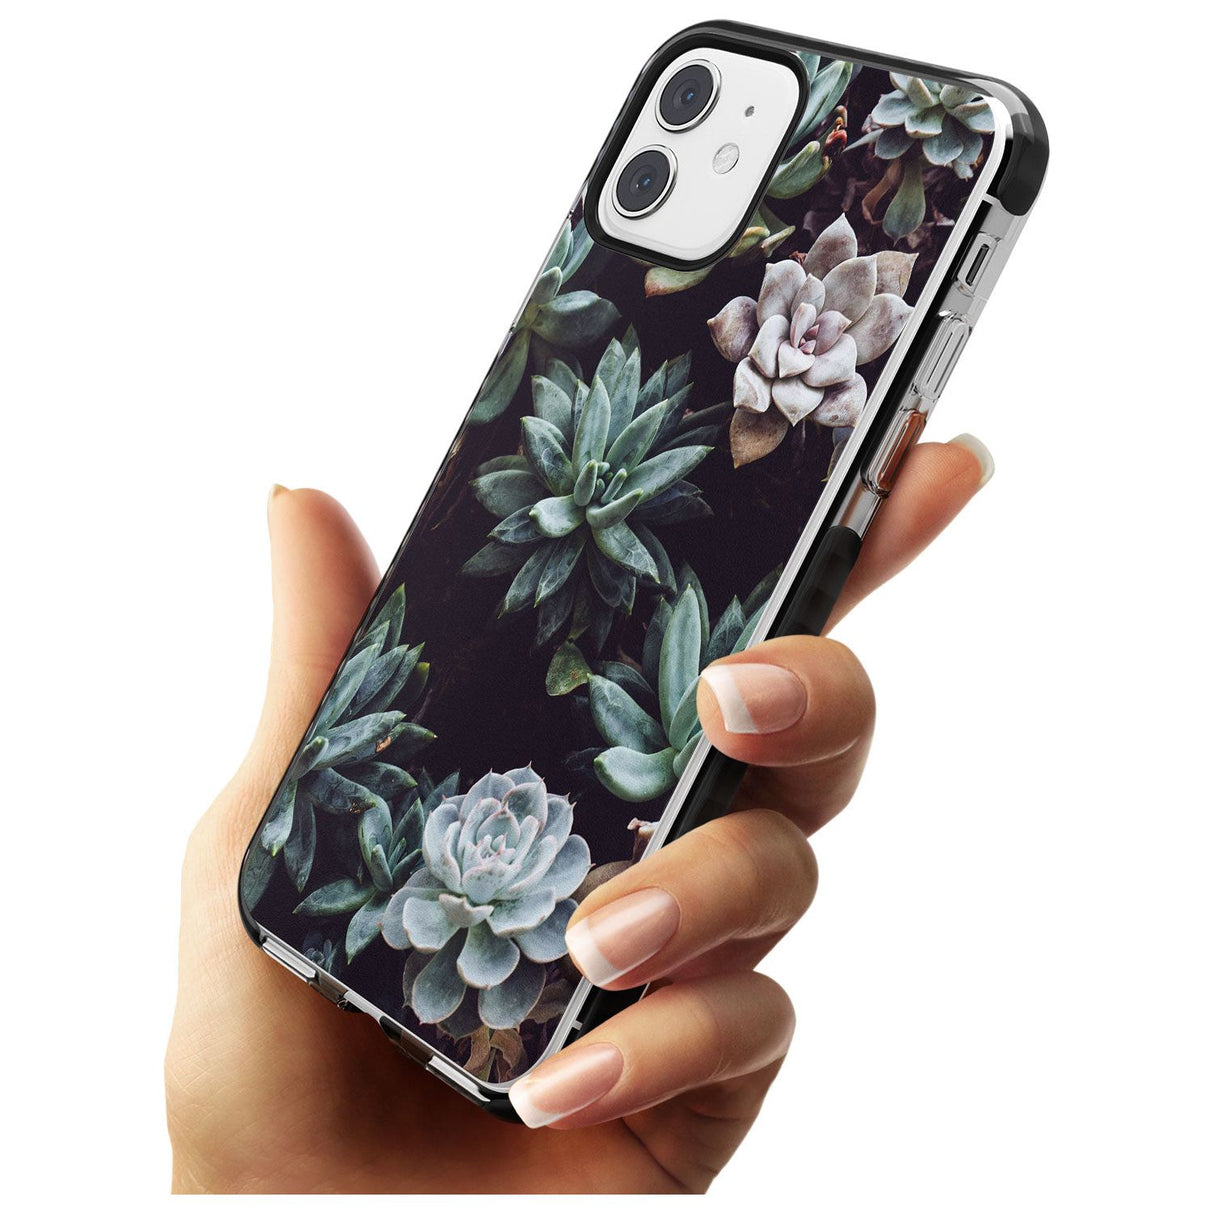 Mixed Succulents - Real Botanical Photographs Black Impact Phone Case for iPhone 11